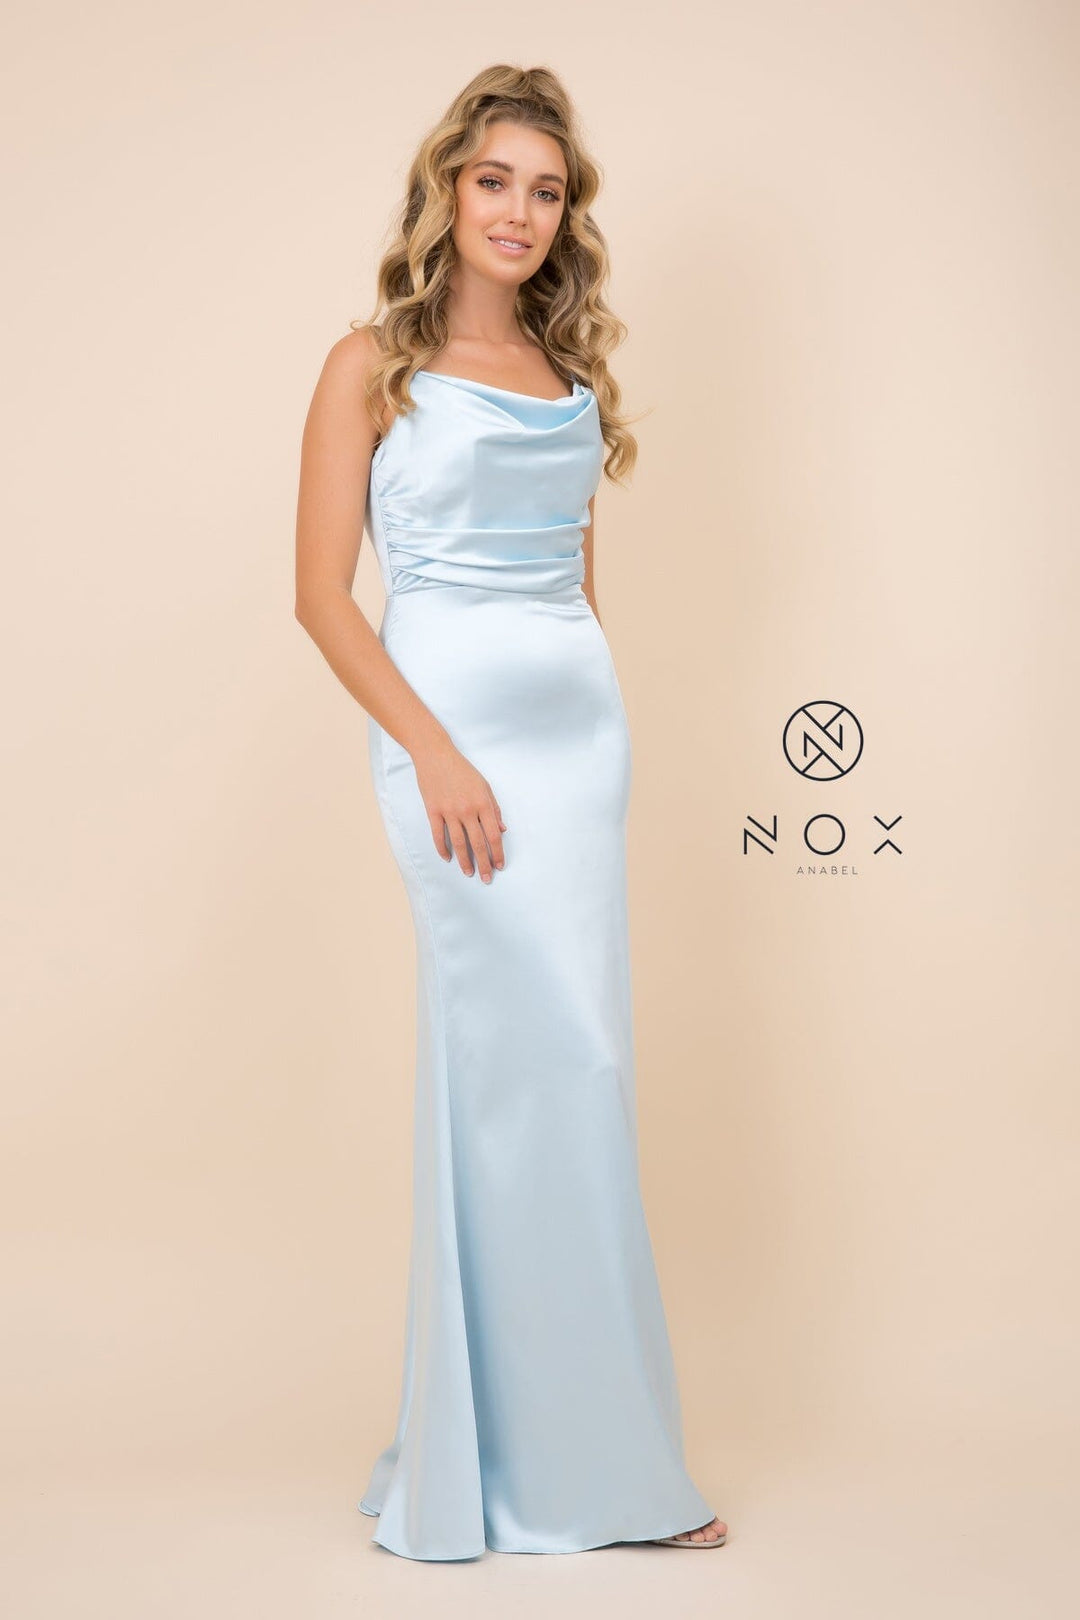 Long Open Back Dress with Cowl Neckline by Nox Anabel C302